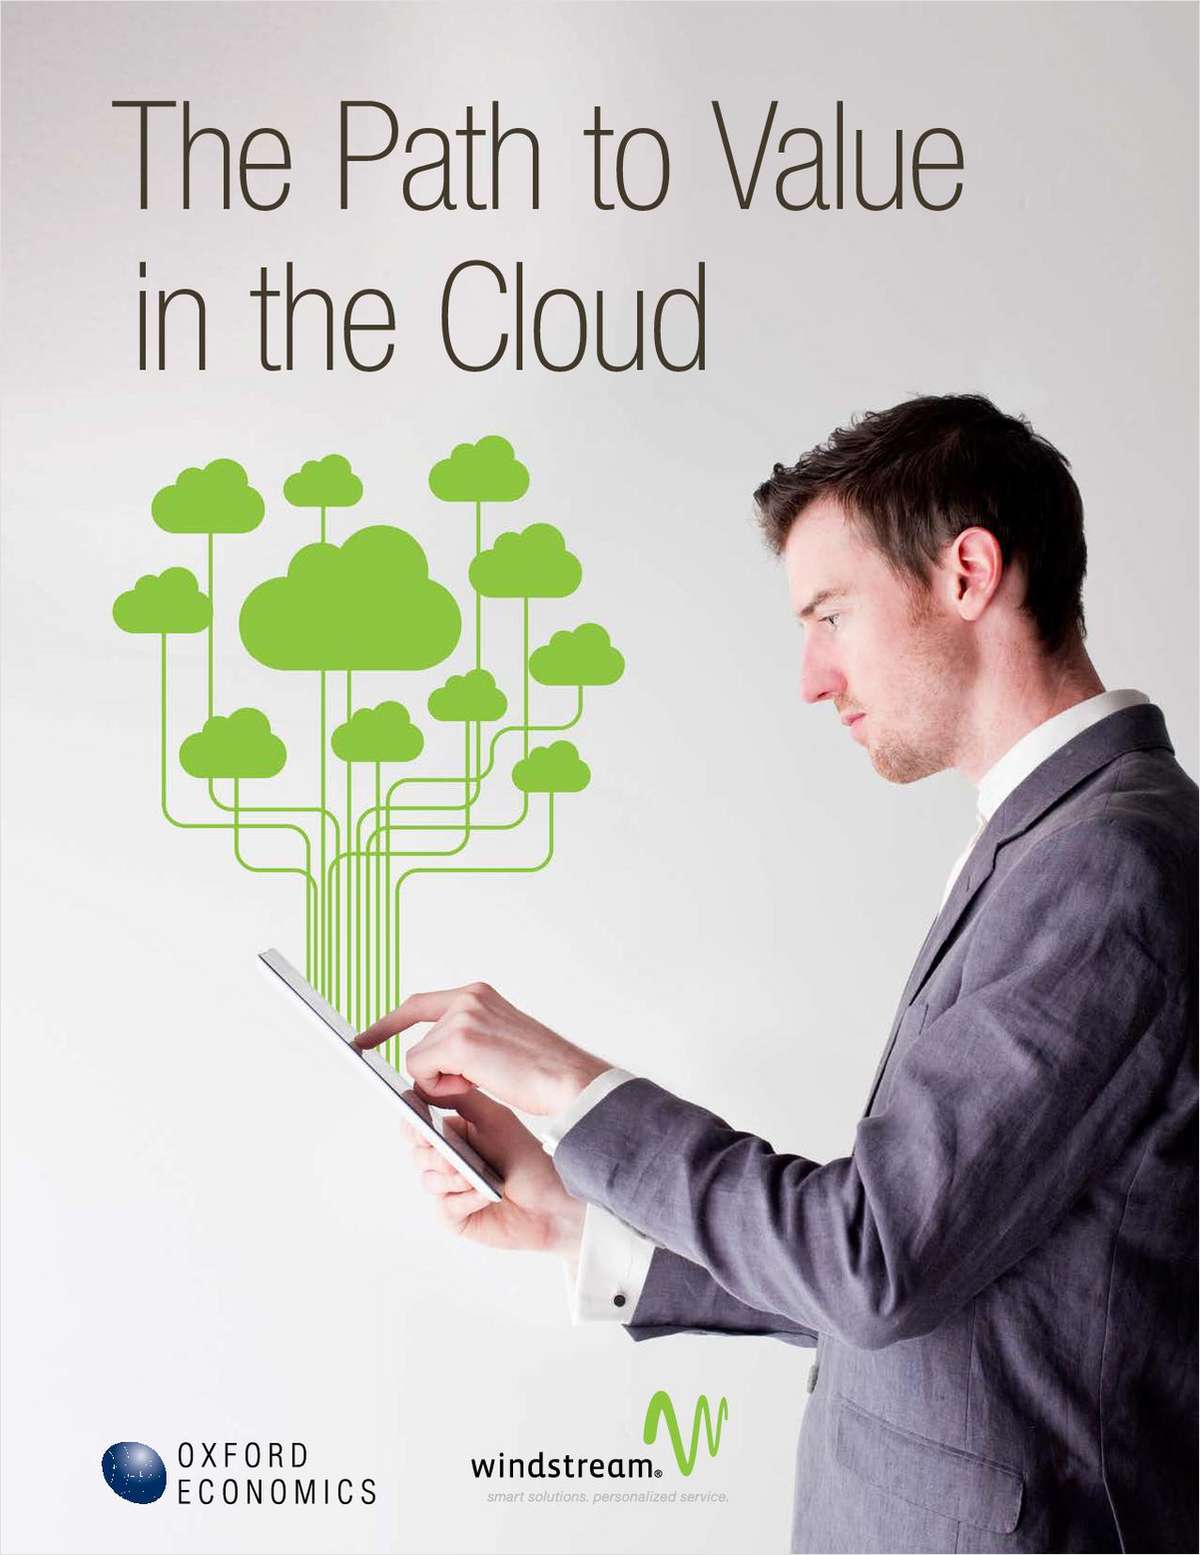 The Path to Value in the Cloud